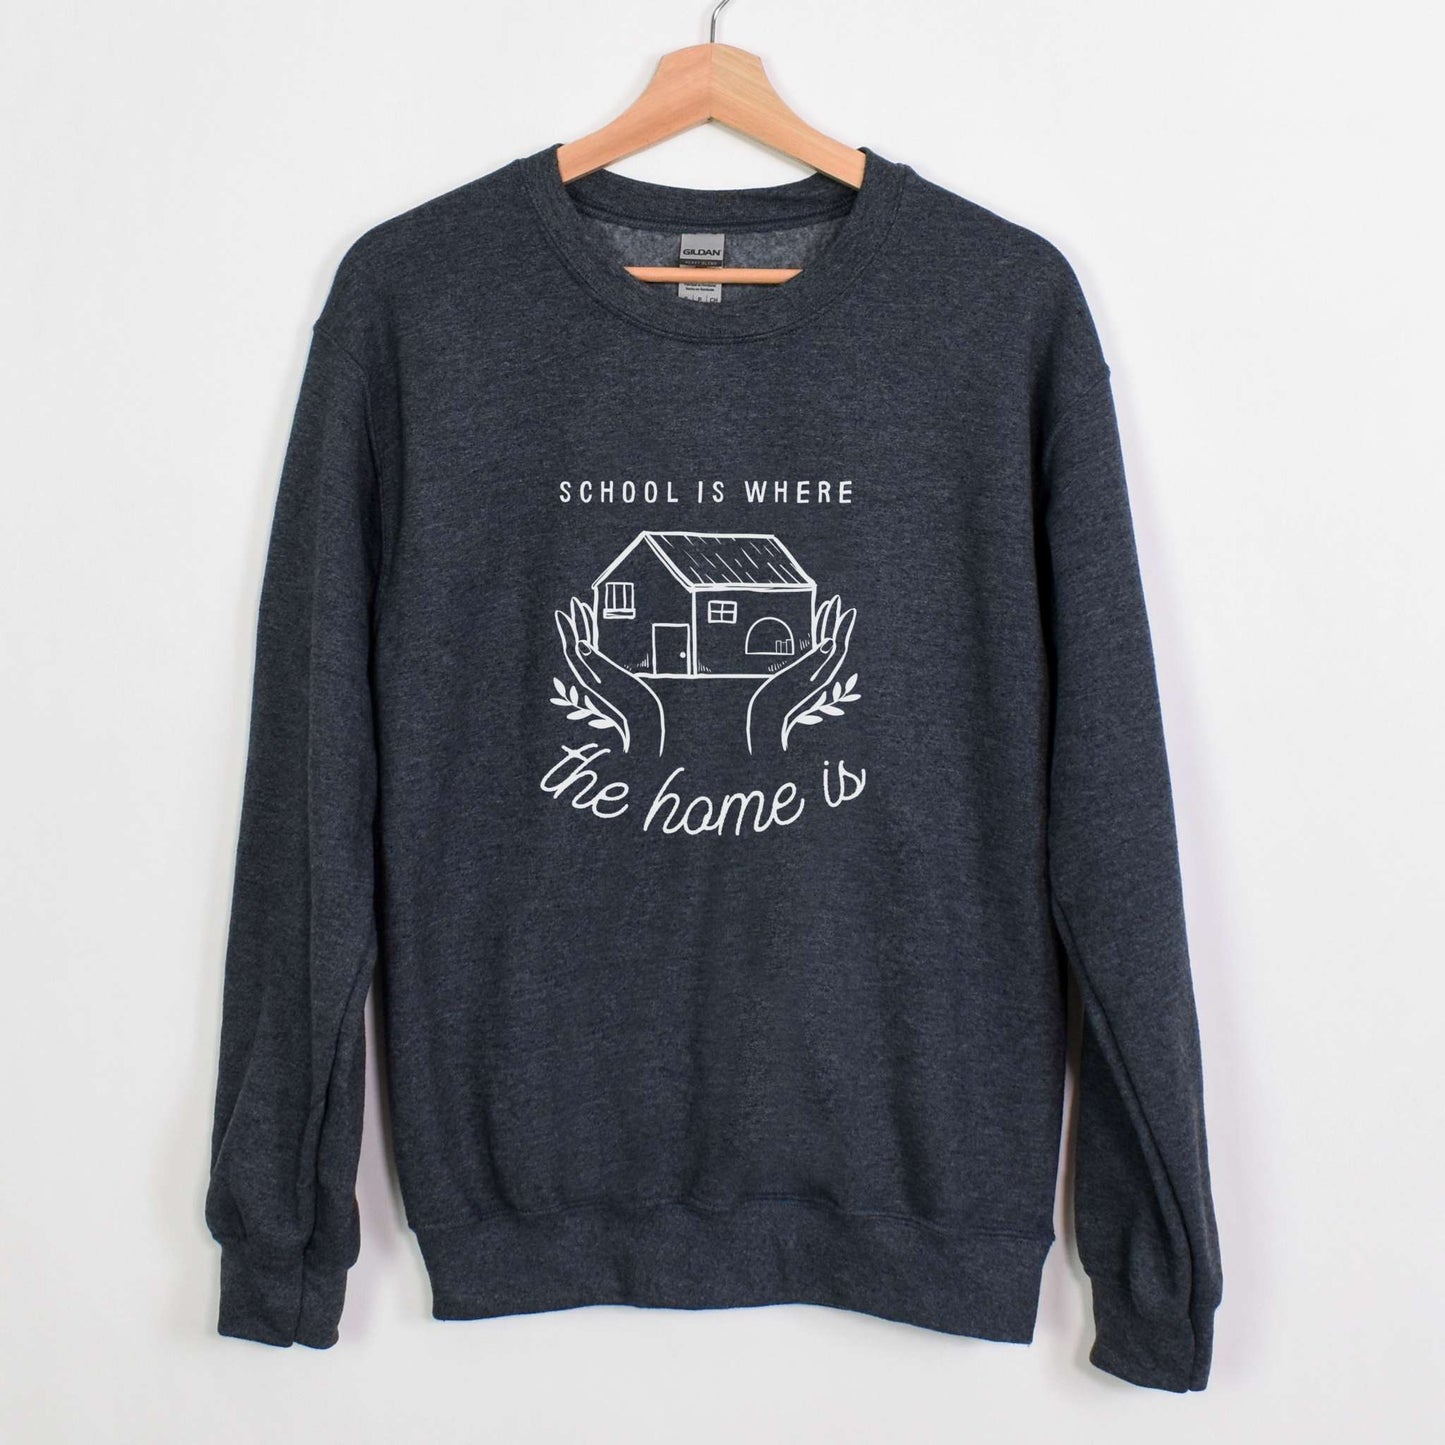 Womens Crewneck Sweatshirt Wolfe Paw Designs Womens Crewneck SweatshirtCozy up while homeschooling your children in our School Is Where The Home Is  sweater.🤍Available in hoodie and tshirt50% cotton, 50% polyesterMedium-heavy fabricLSchool Is Where The Home Is  Womens Crewneck Sweatshirt